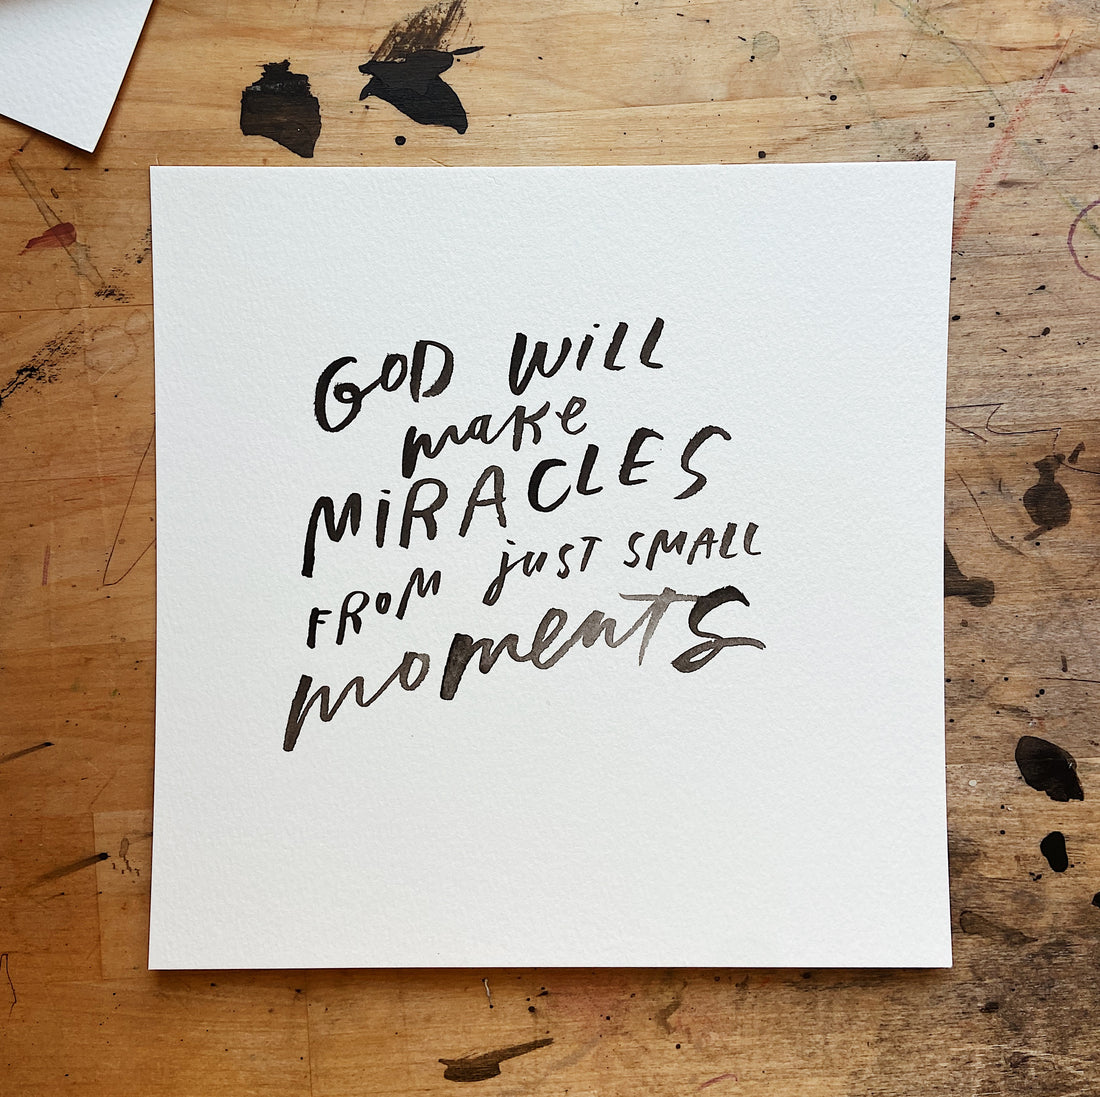 Miracles from Moments: Original Artwork